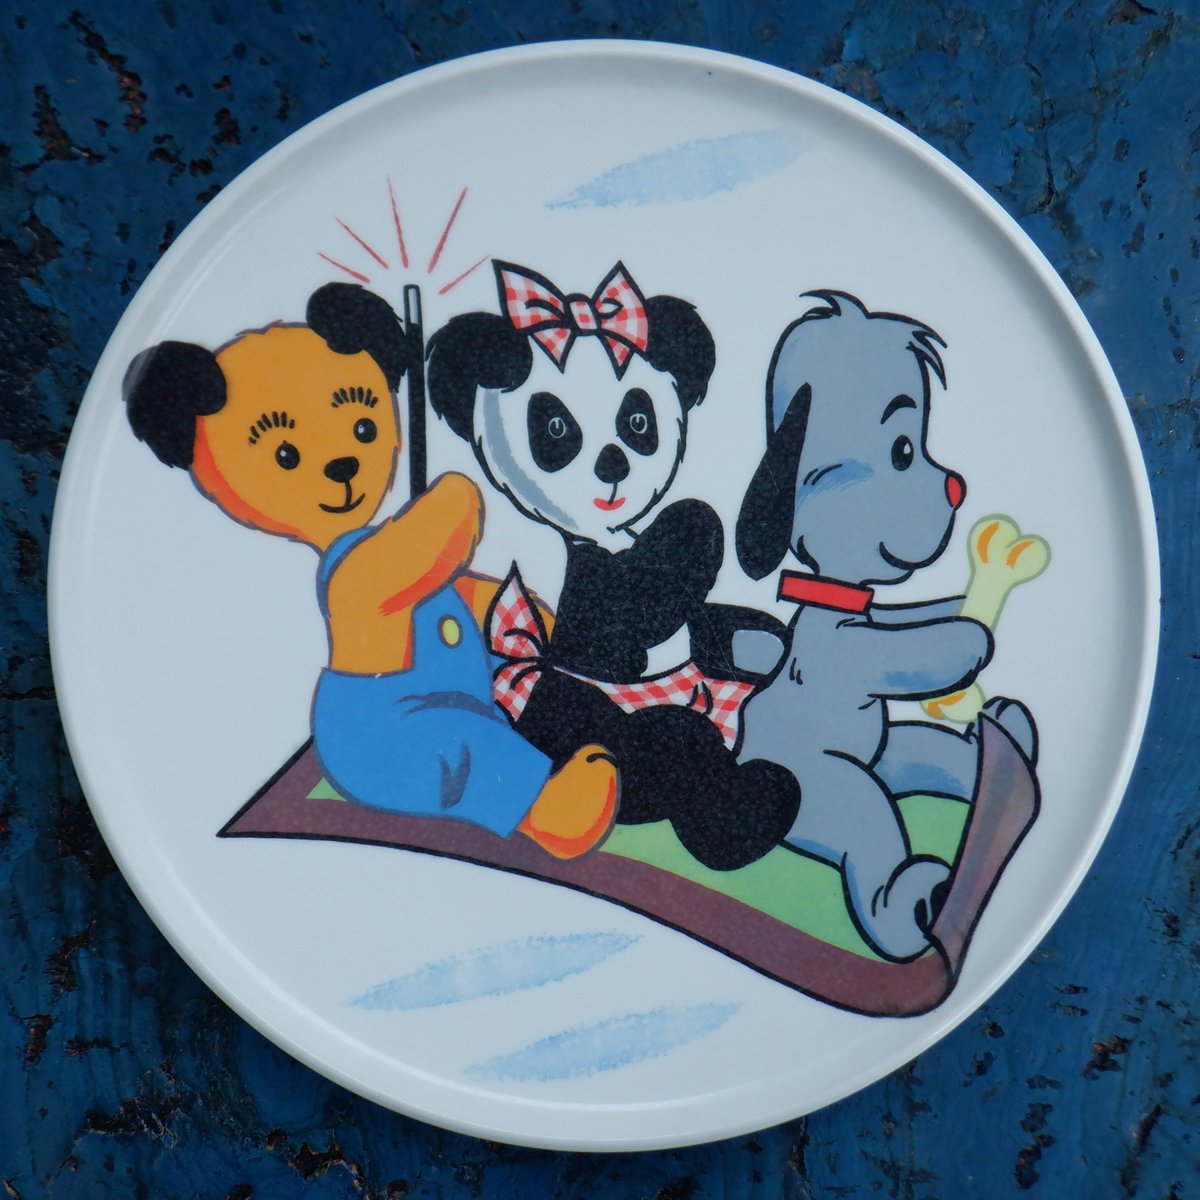 A vintage Sooty, Soo and Sweep plate. 17.5 cm in diameter. Made in England by Encore Gaydon. 🛒 ebay.co.uk/itm/3055496147… #Sooty #Soo #Sweep #SootyAndSweep #Vintage #FollowVintage #eBay